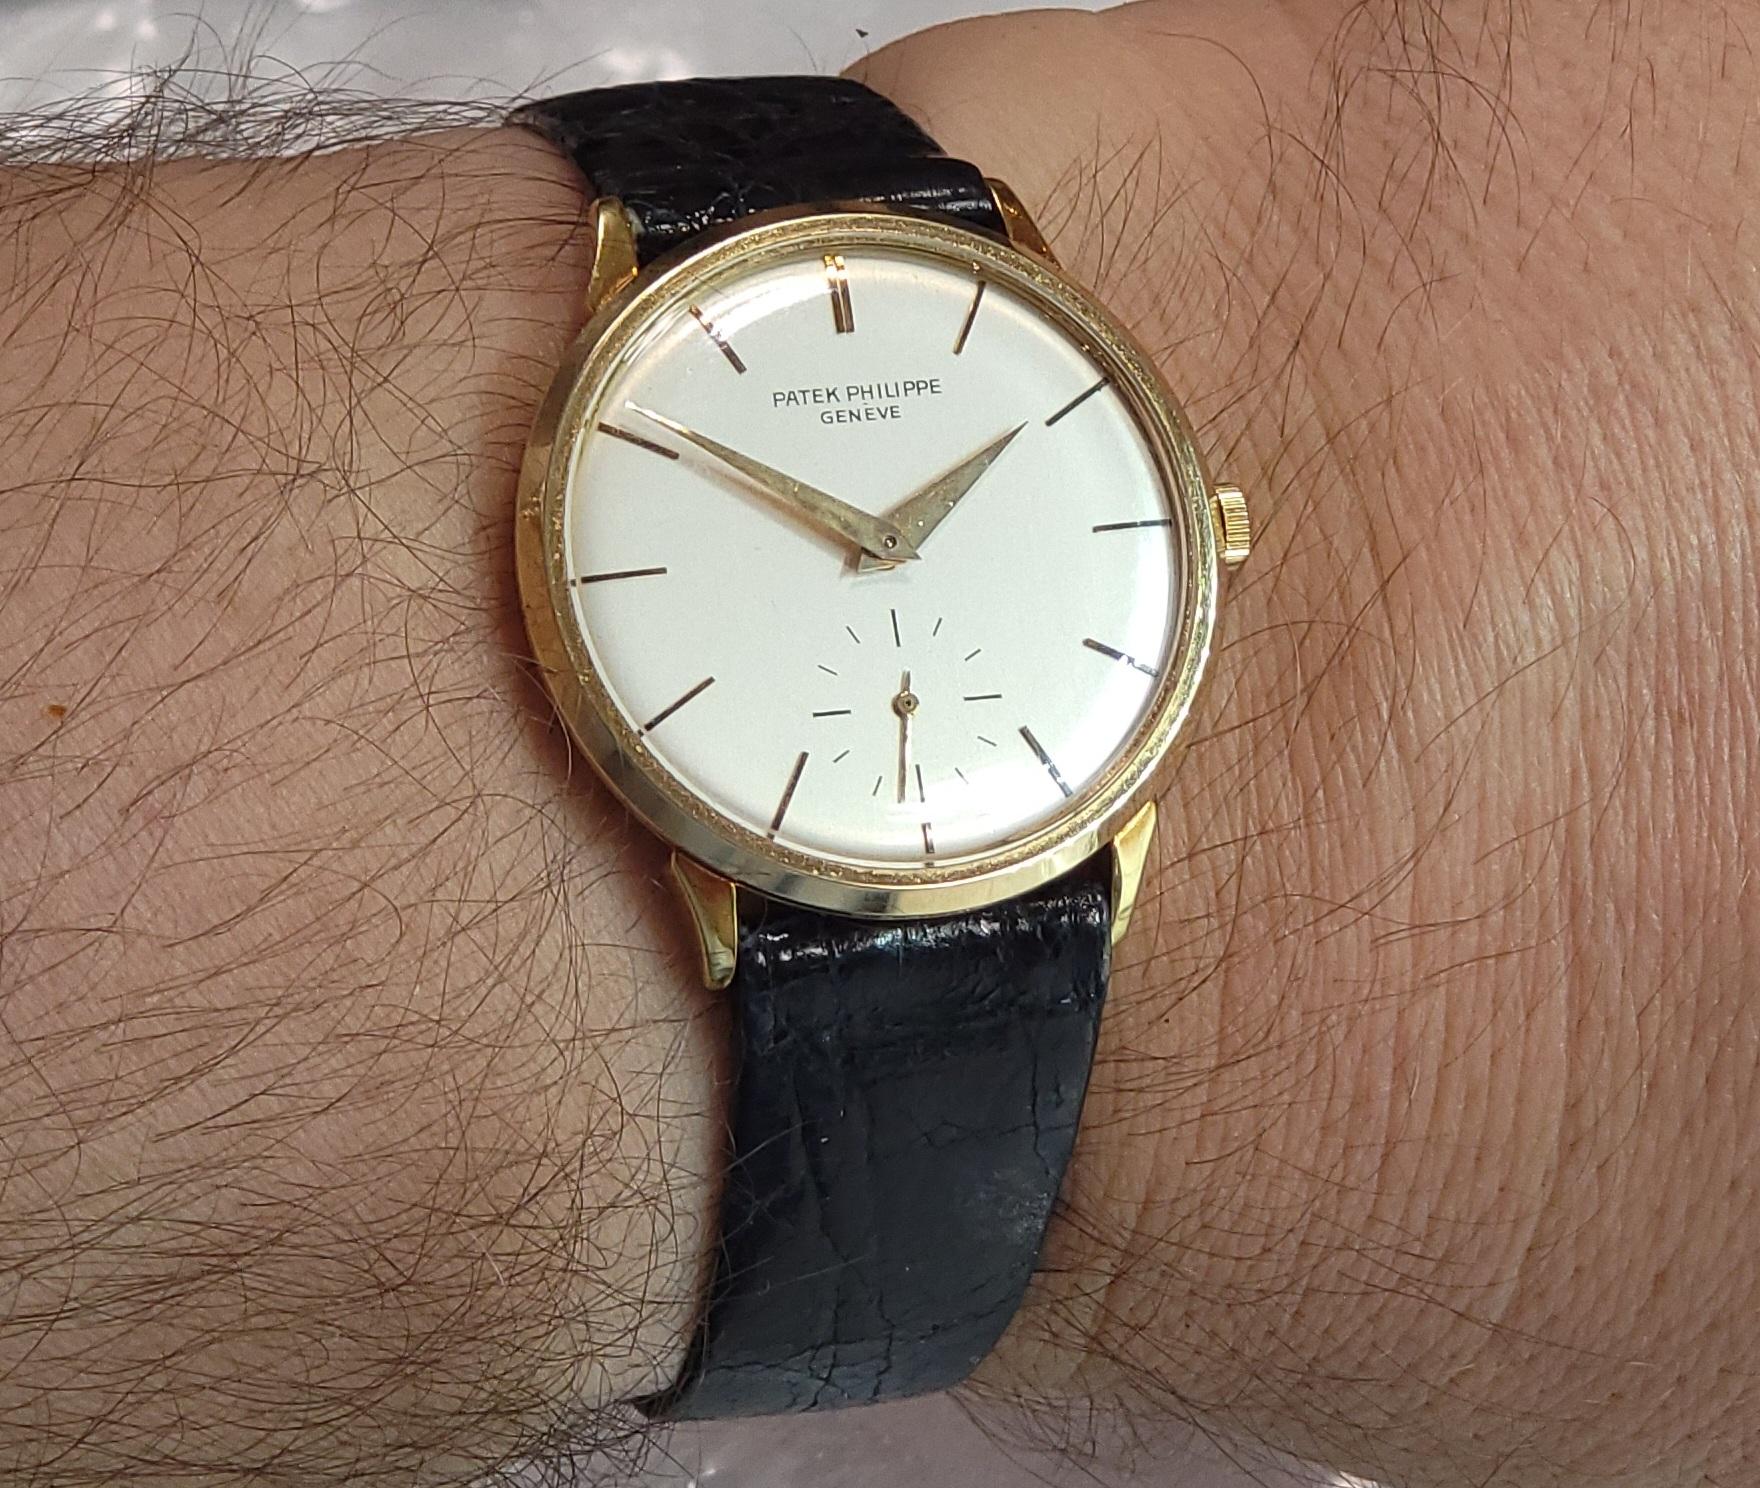 Patek Philippe Calatrava 18 kt gold  Wrist Watch Cal. 27 AM 400 anti-magnétiques with Patek Philippe Extract from the Archives

There is the saying that “You never actually own a Patek Philippe. You merely look after it for the next generation.” and